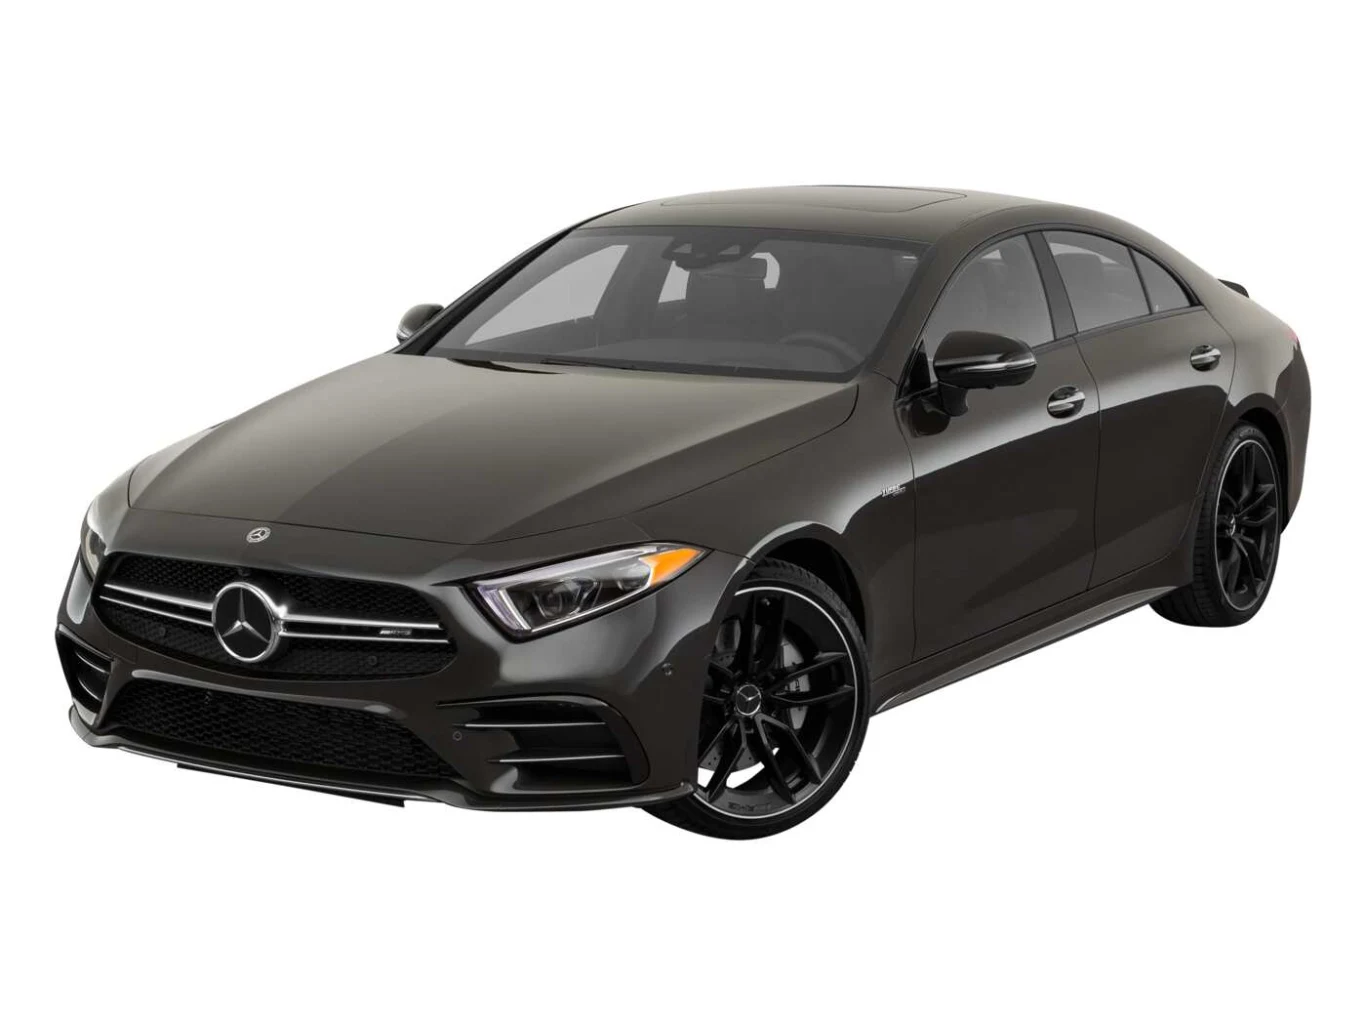 Mercedes-Benz CLS AMG 53 4MATIC+ 9G-TRONIC